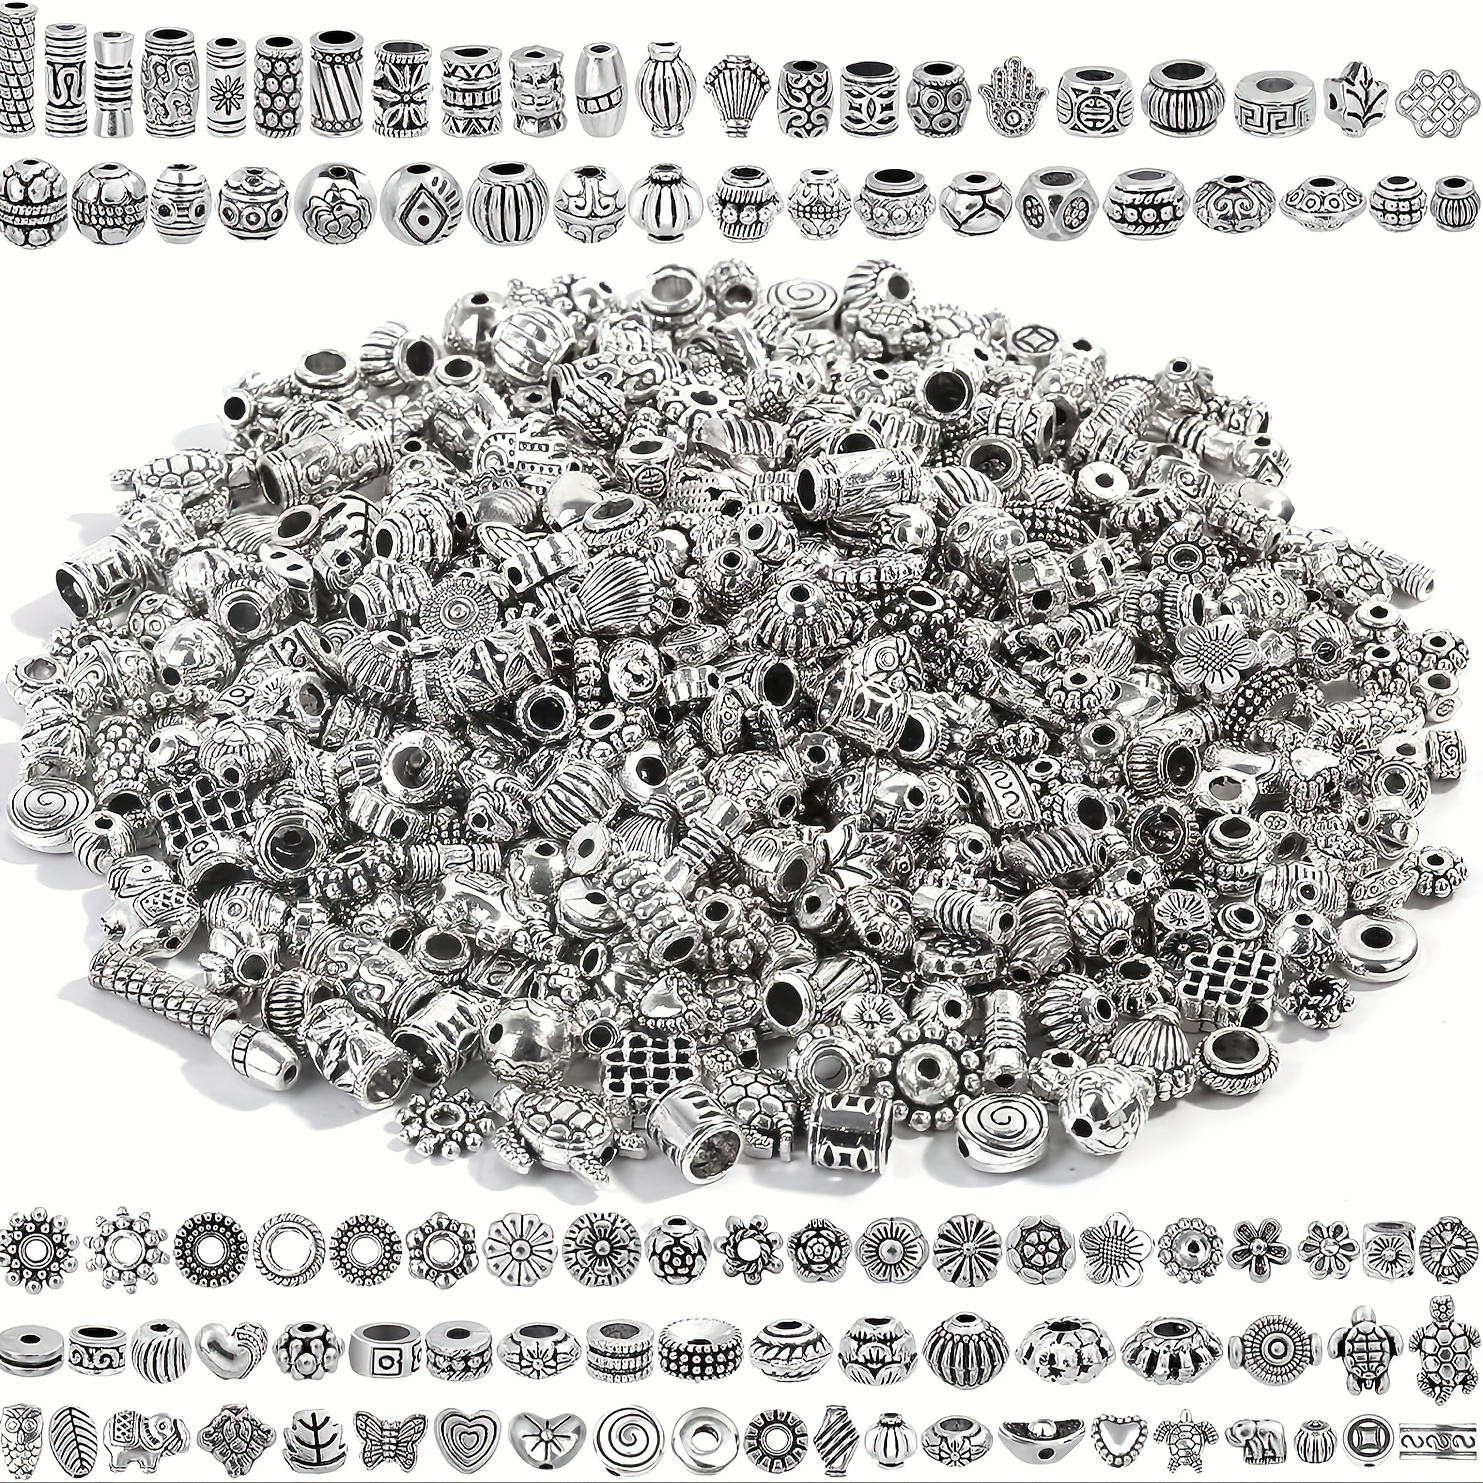 

60g Silvery Alloy Assorted Mixed Creative Shape Loose Spacer Beads For Jewelry Making Bulk Random Styles Diy Bracelets Necklace Earrings Handmade Craft Supplies